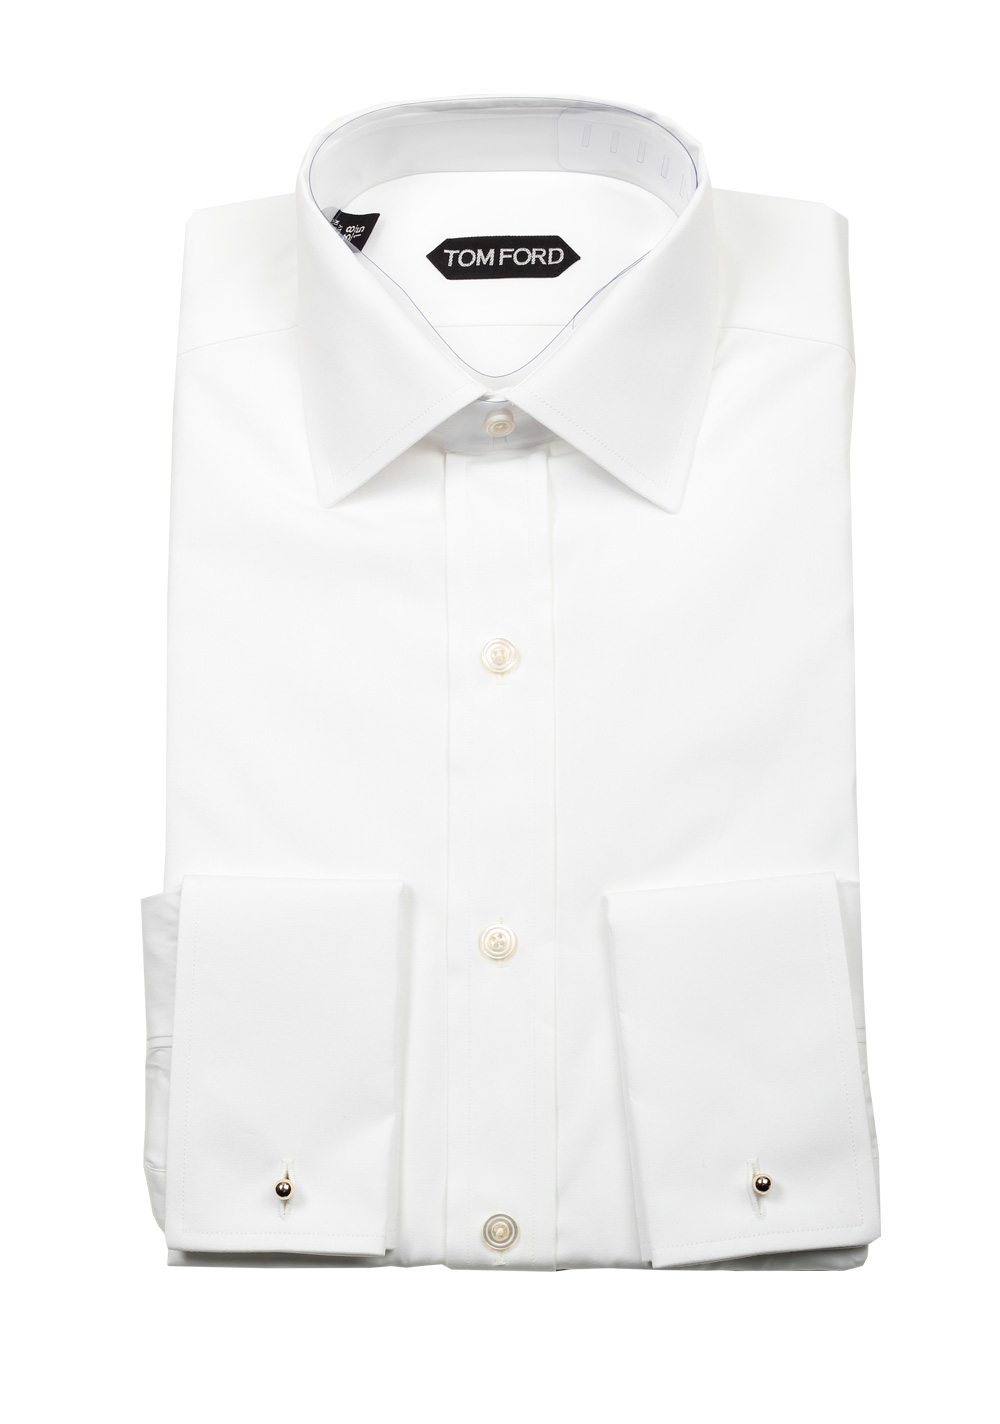 TOM FORD Solid White Dress Spread Shirt French Cuffs Size 38 / 15 U.S. Slim Fit | Costume Limité